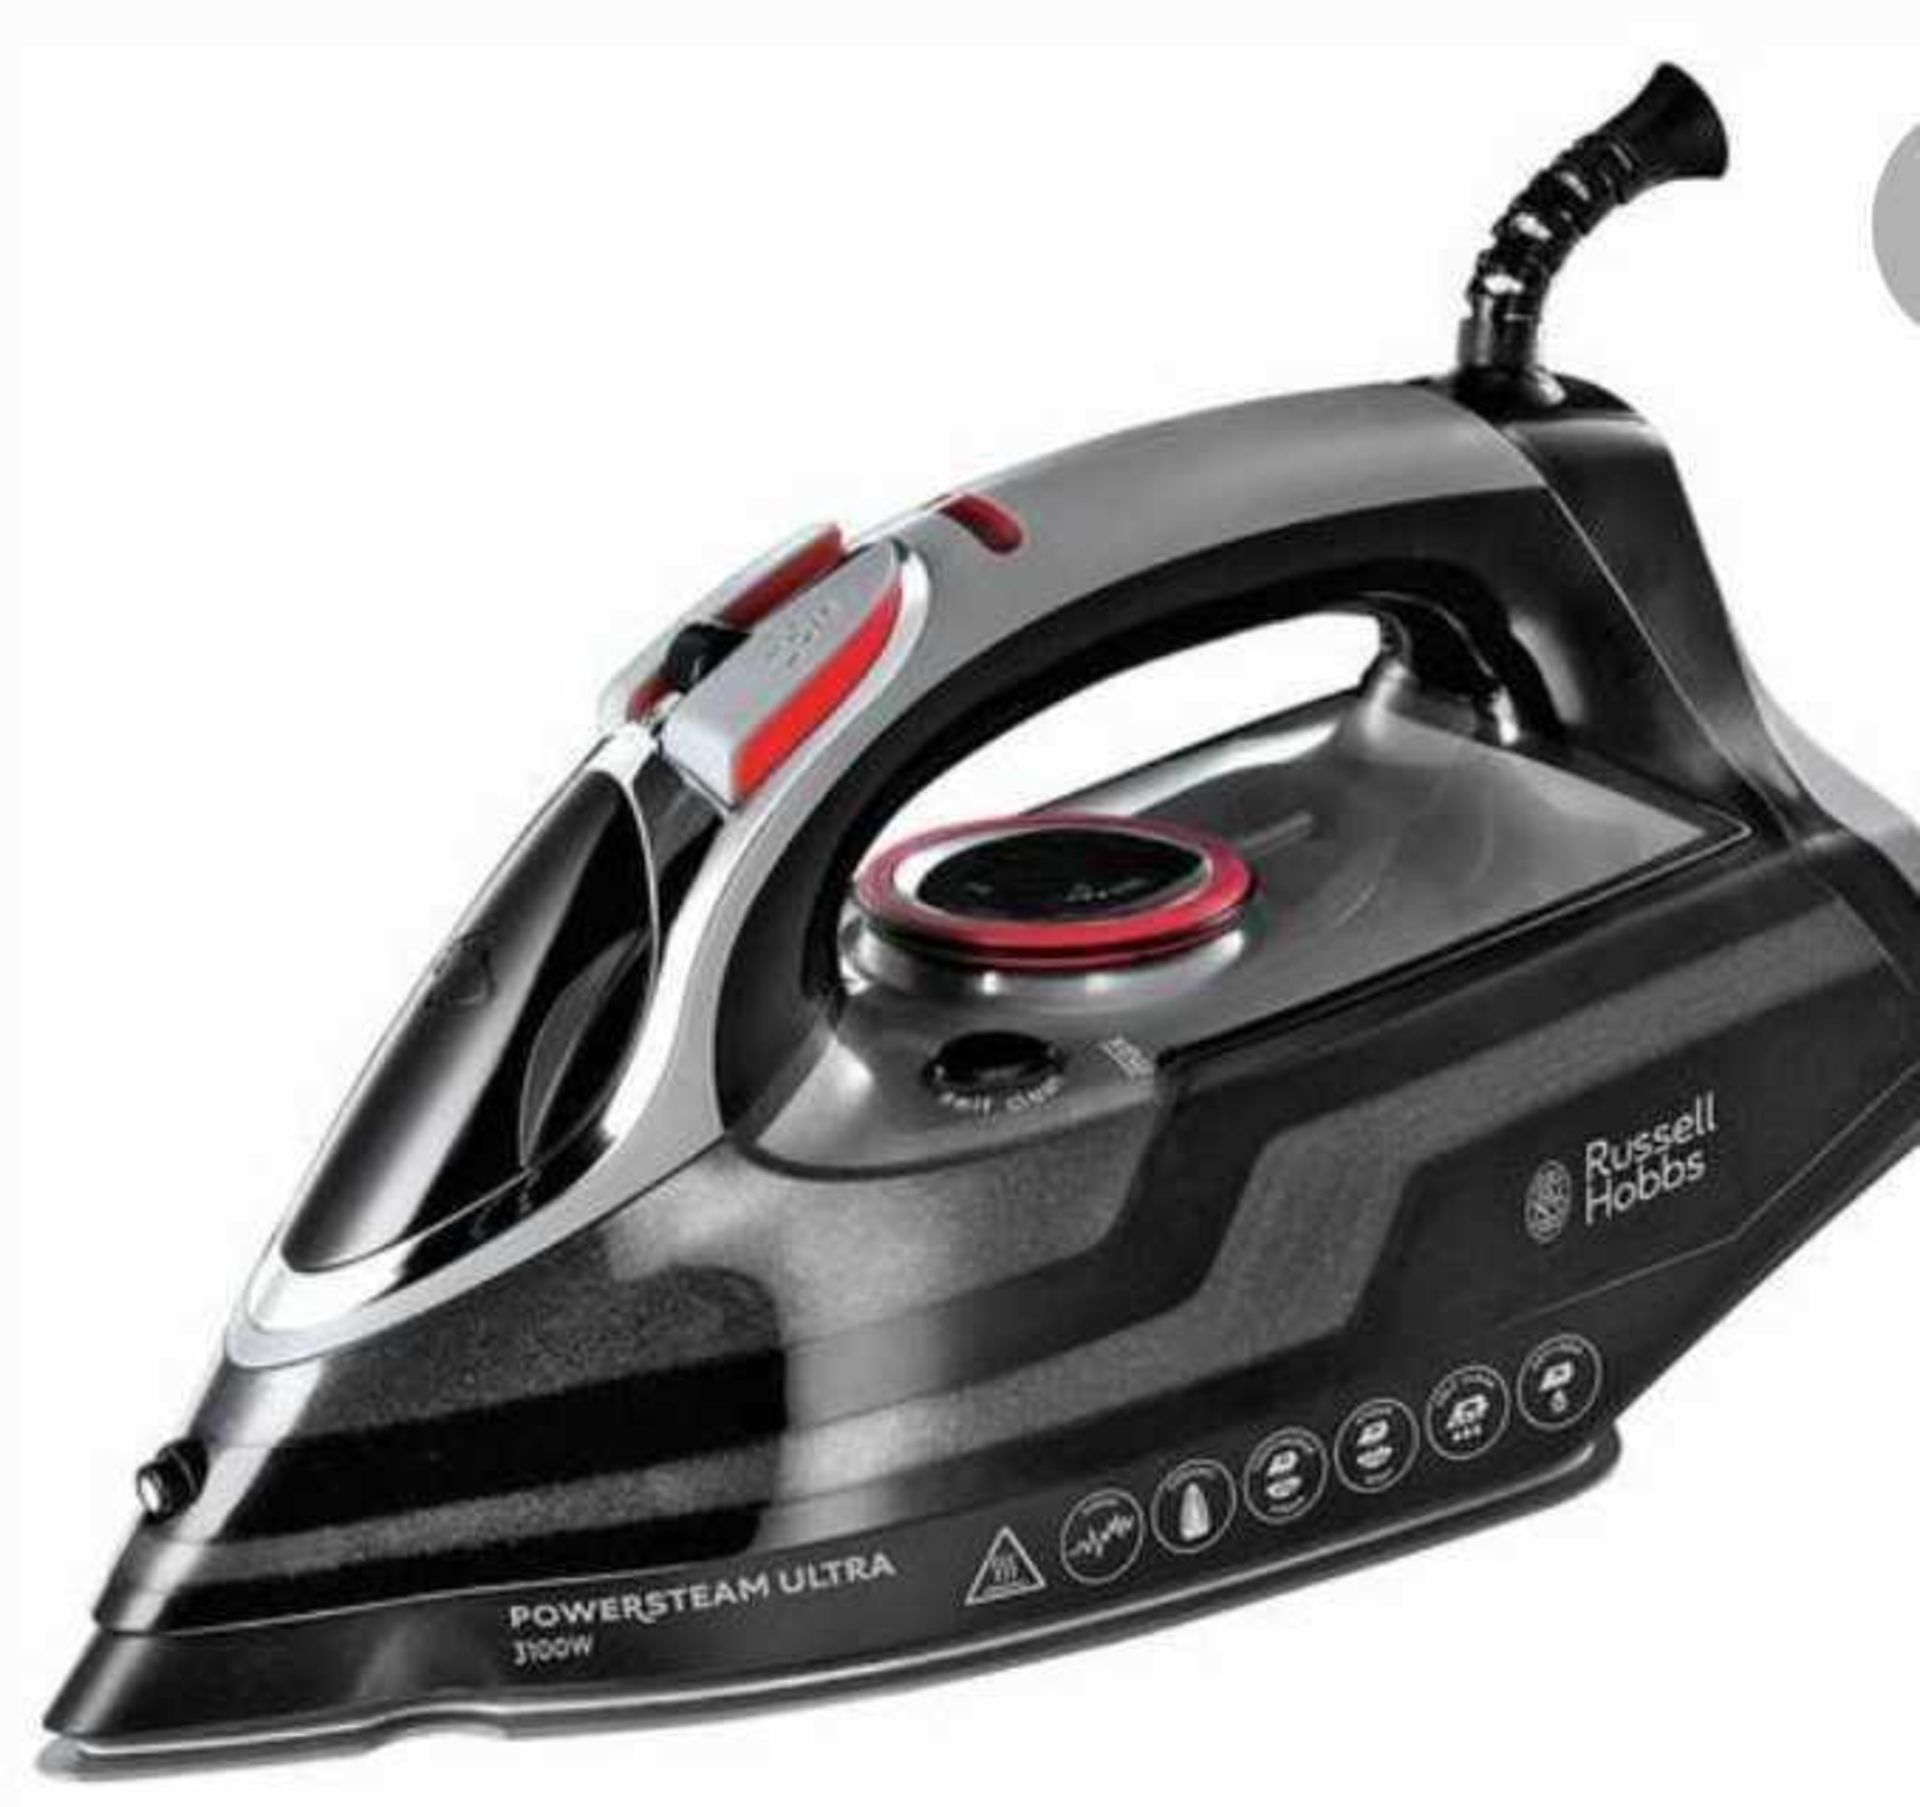 RRP £250 Lot To Contain X5 Irons, X2 John Lewis Speed Steam Irons, Russell Hobbs Power Steam Ultra,